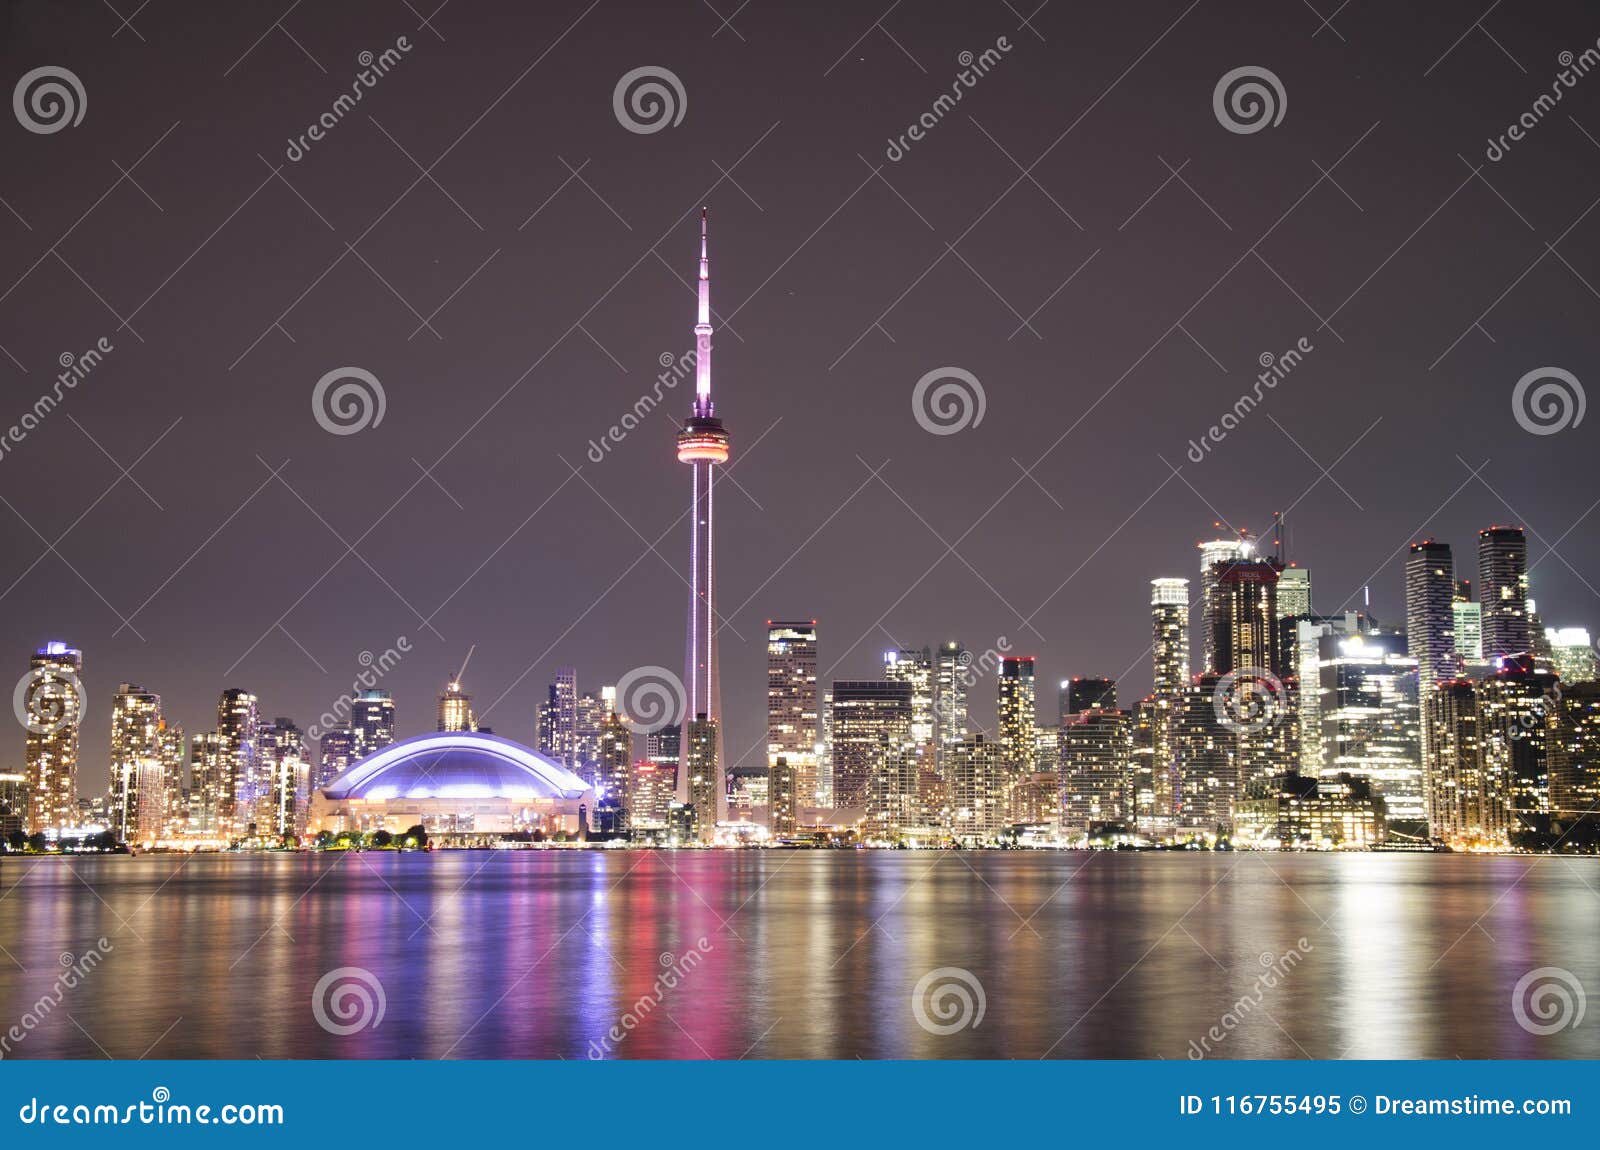 Wallpaper ID 238288  a dim cityscape of toronto with the cn tower lit up  in purple toronto night cityscape 4k wallpaper free download